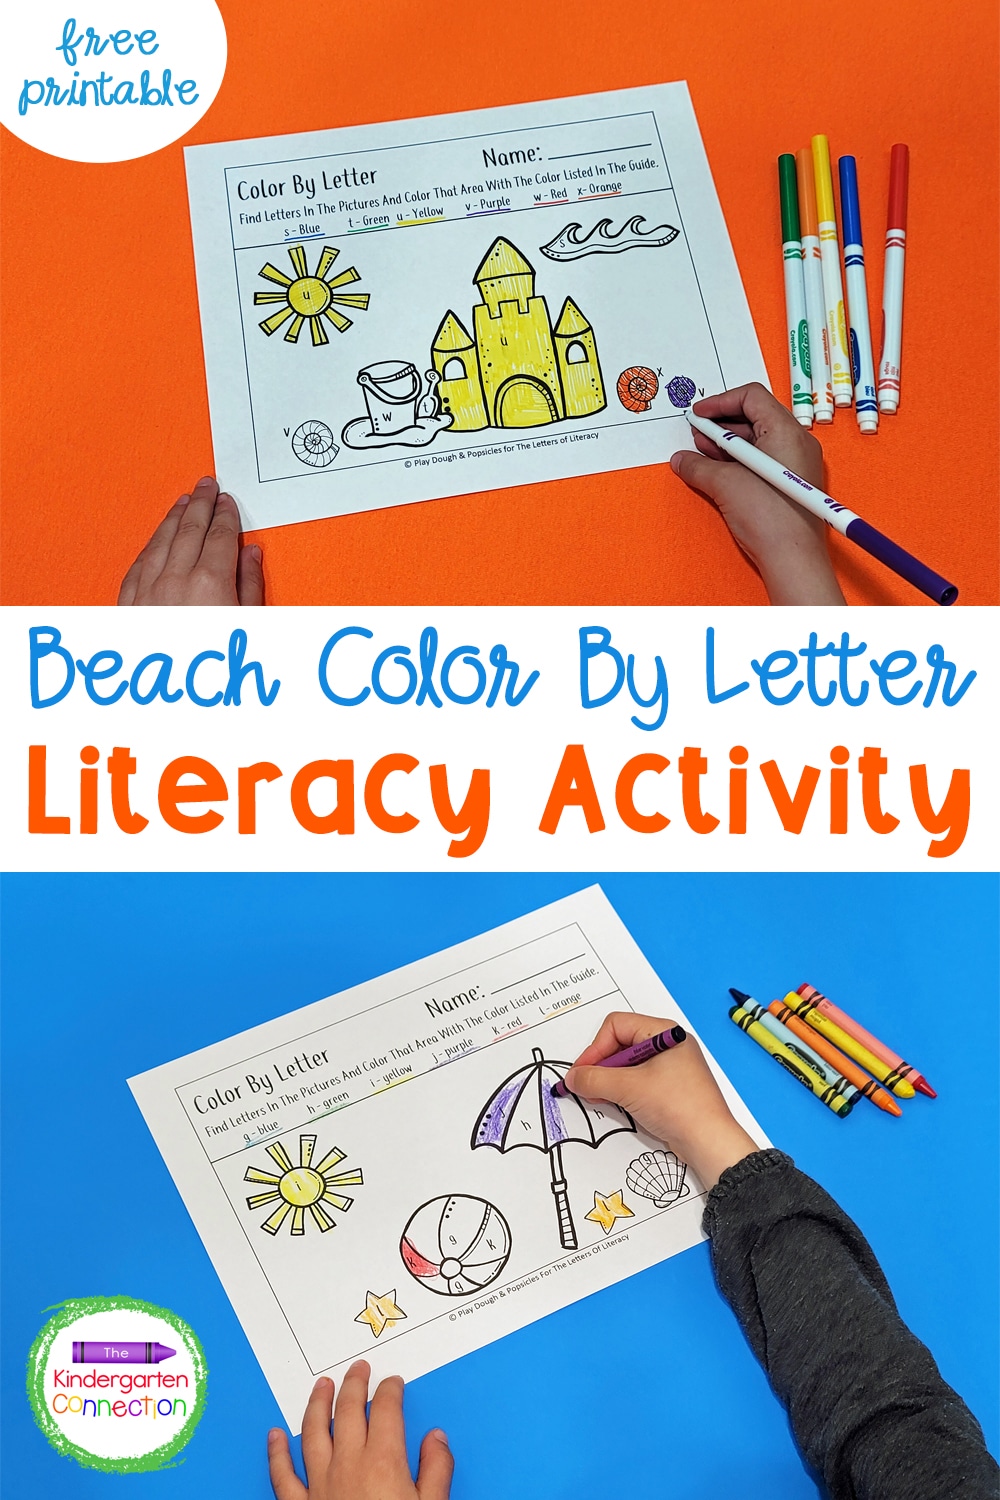 Work on letter recognition with your Pre-K or Kindergartener with these fun and free Beach Themed Color By Letter printables!